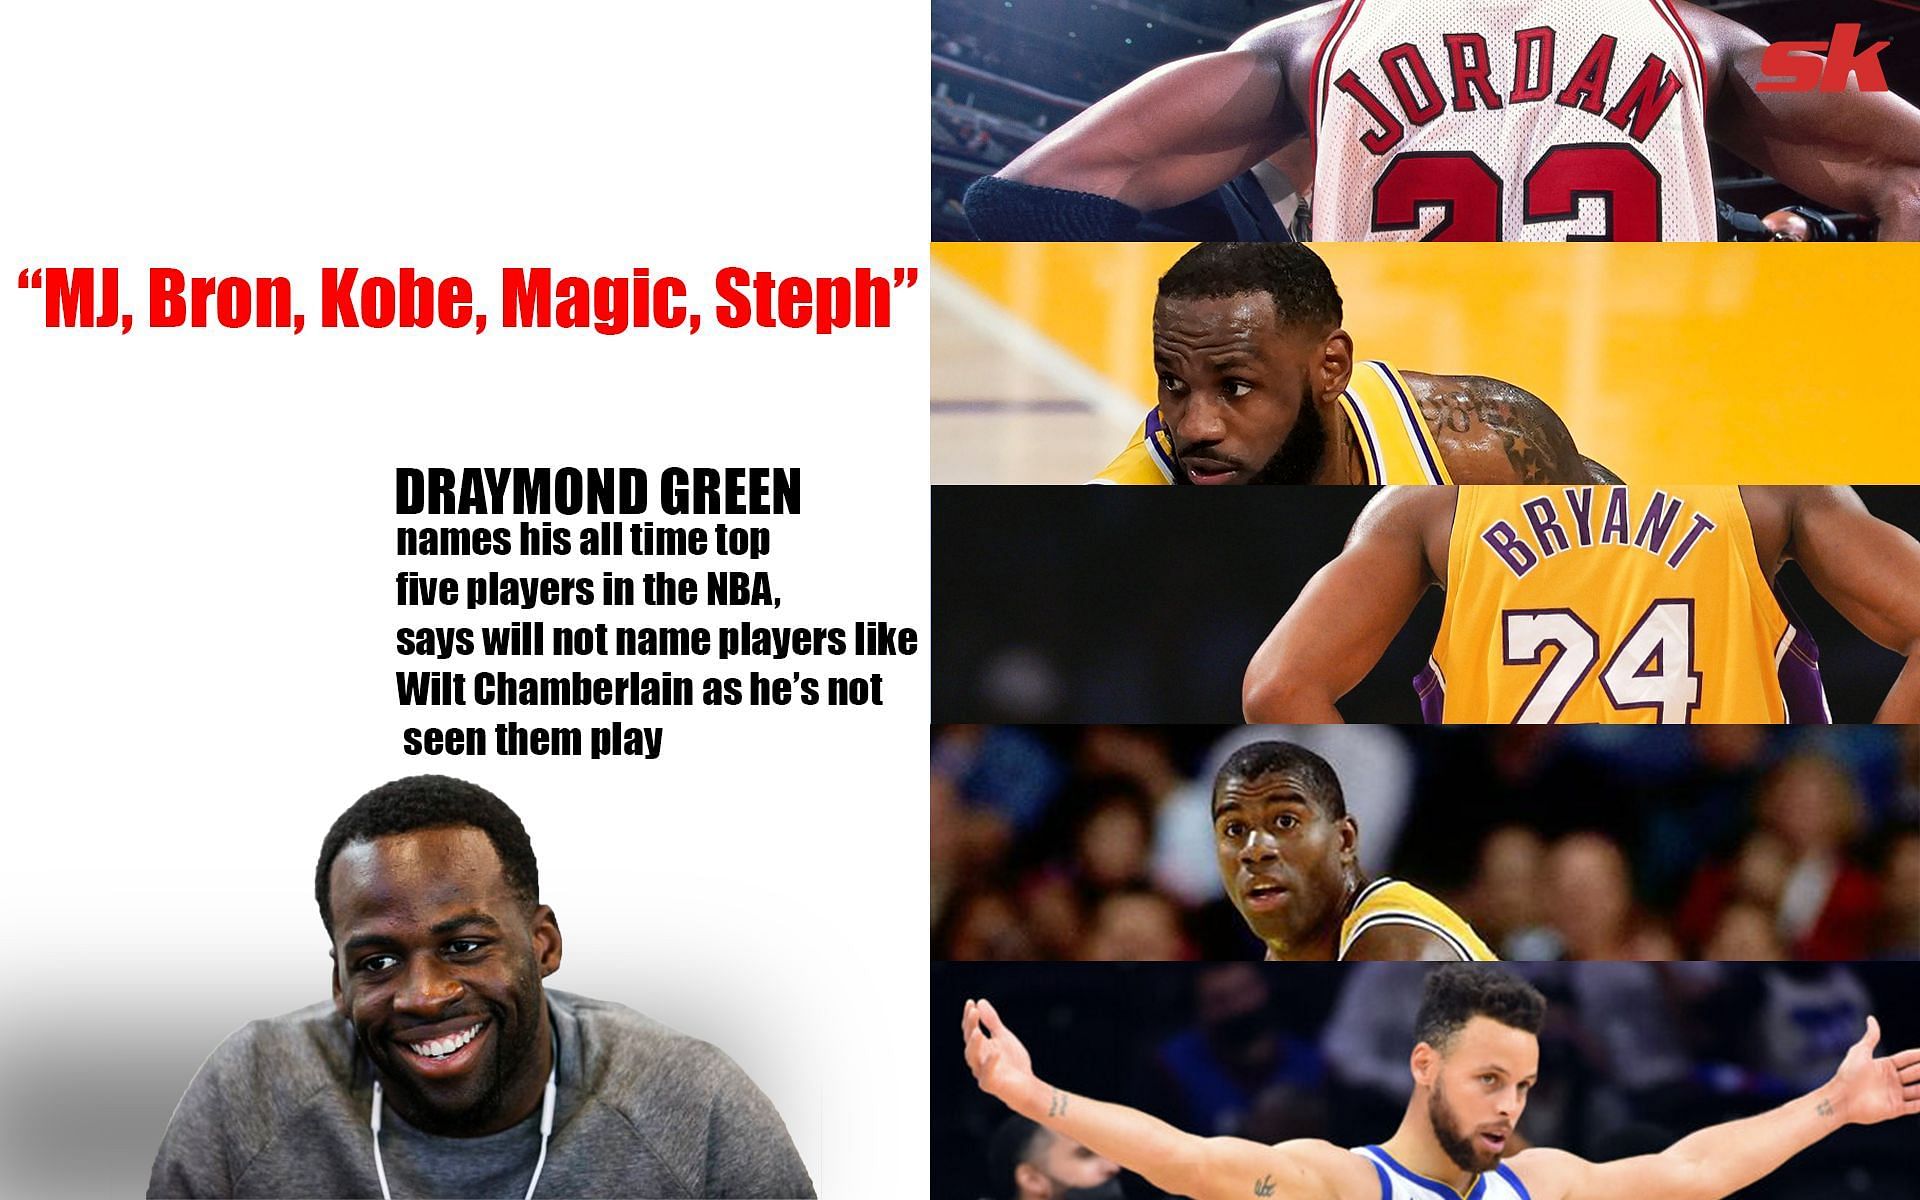 Draymond Green picks his list of top five players in the NBA, from whom he himself has seen play.